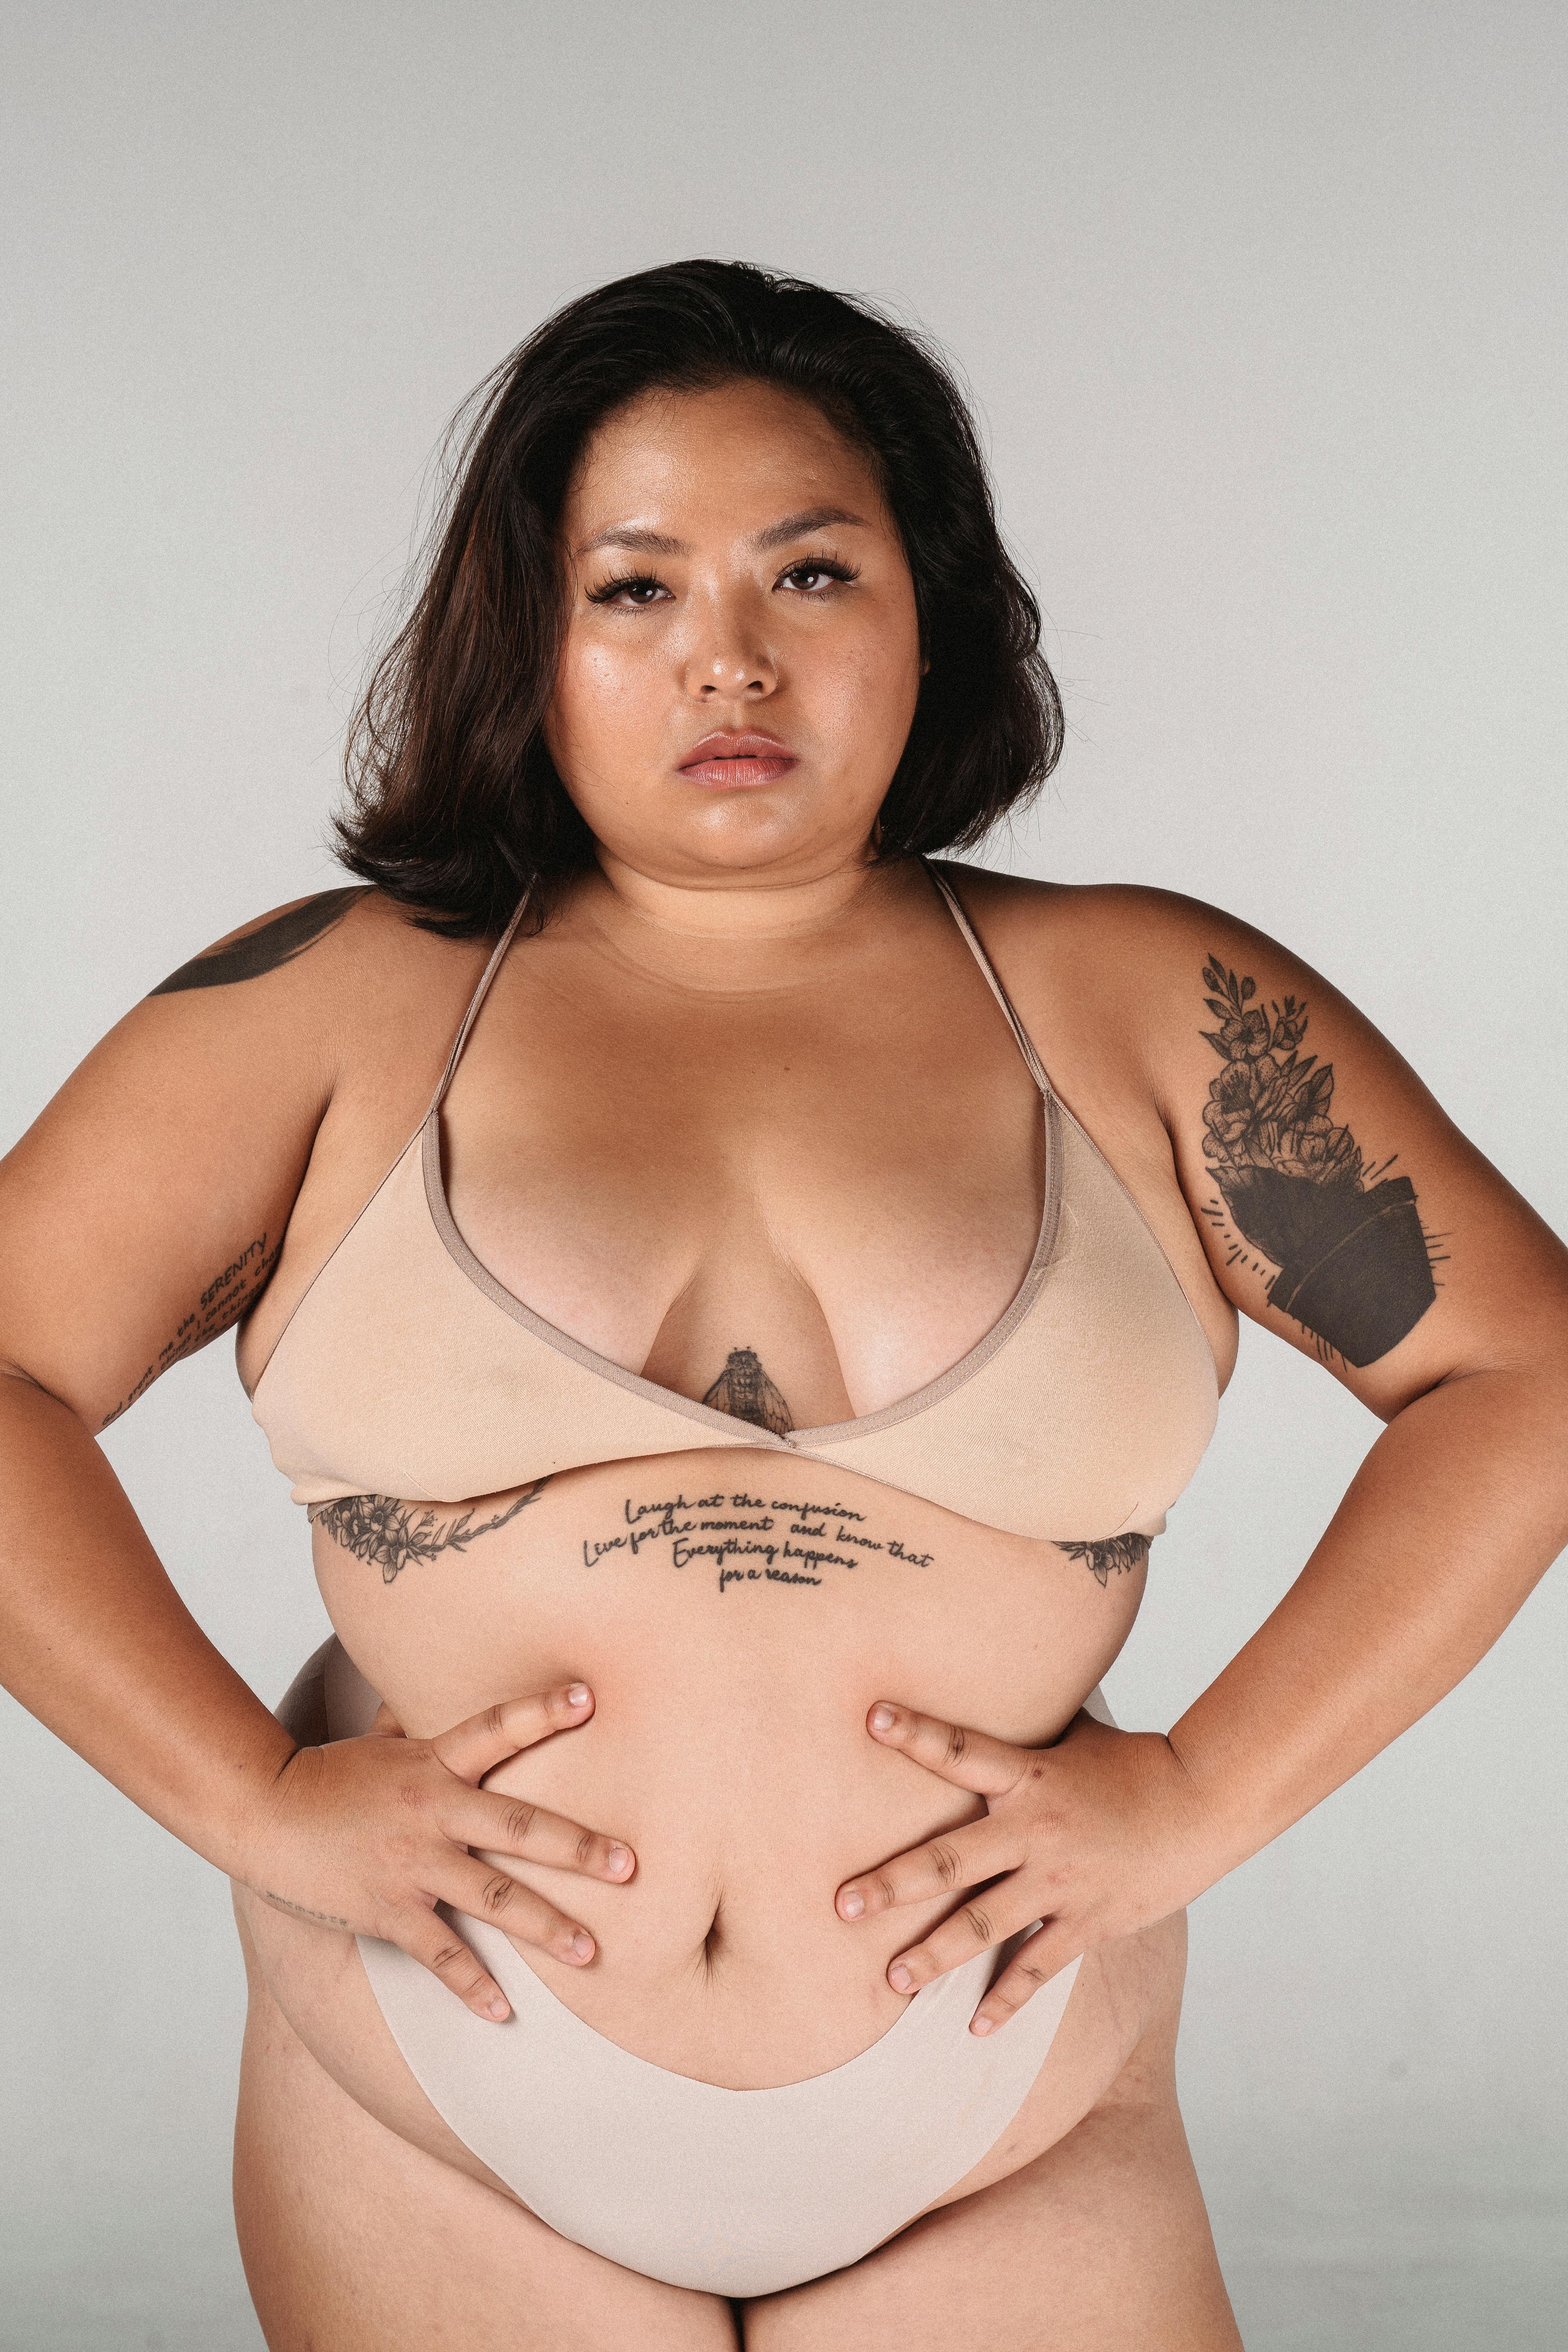 Serious ethnic naked overweight woman in underwear in studio · Free Stock Photo